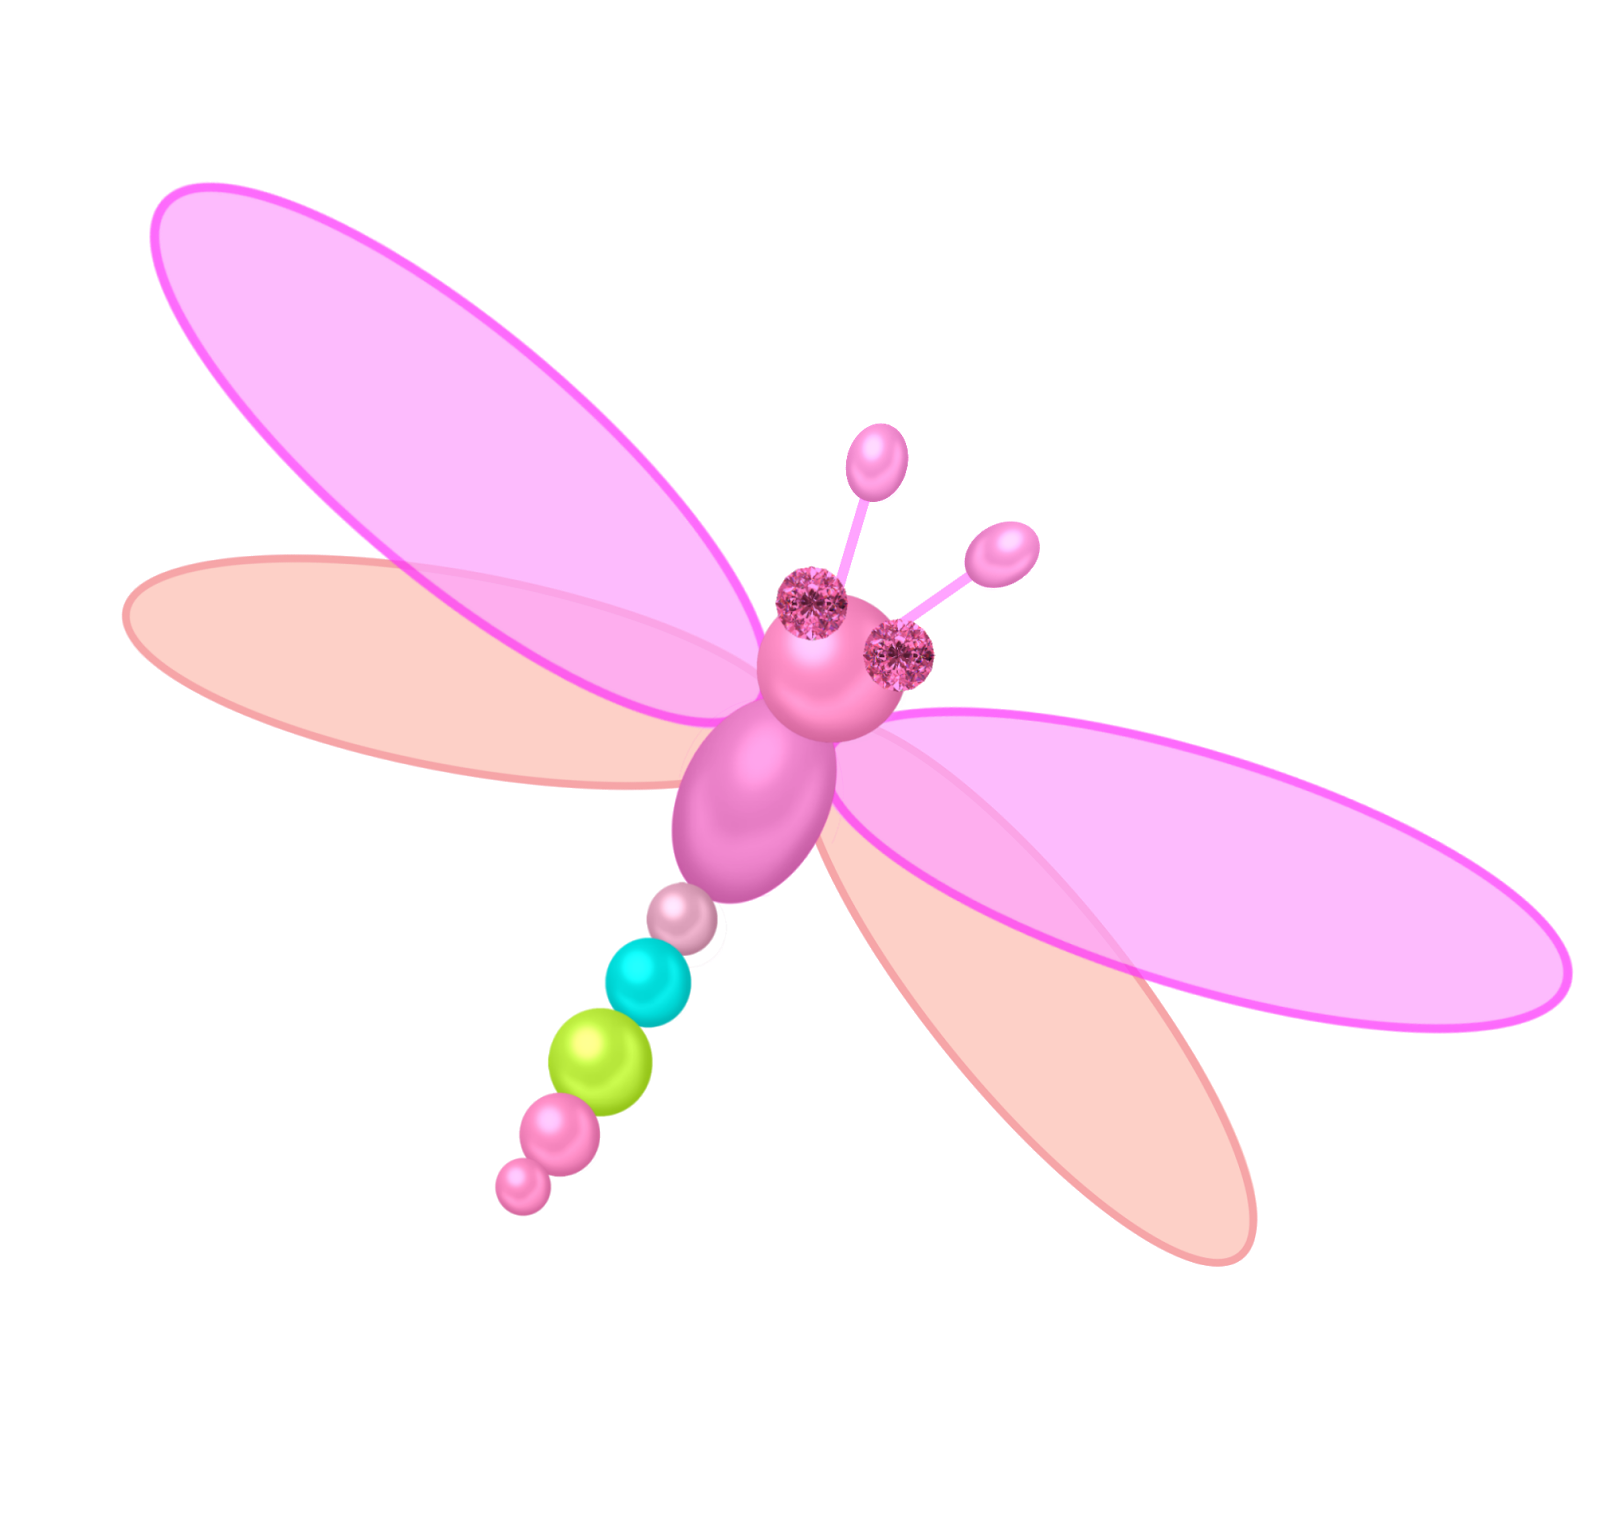 dragonfly clipart beautiful dragonfly